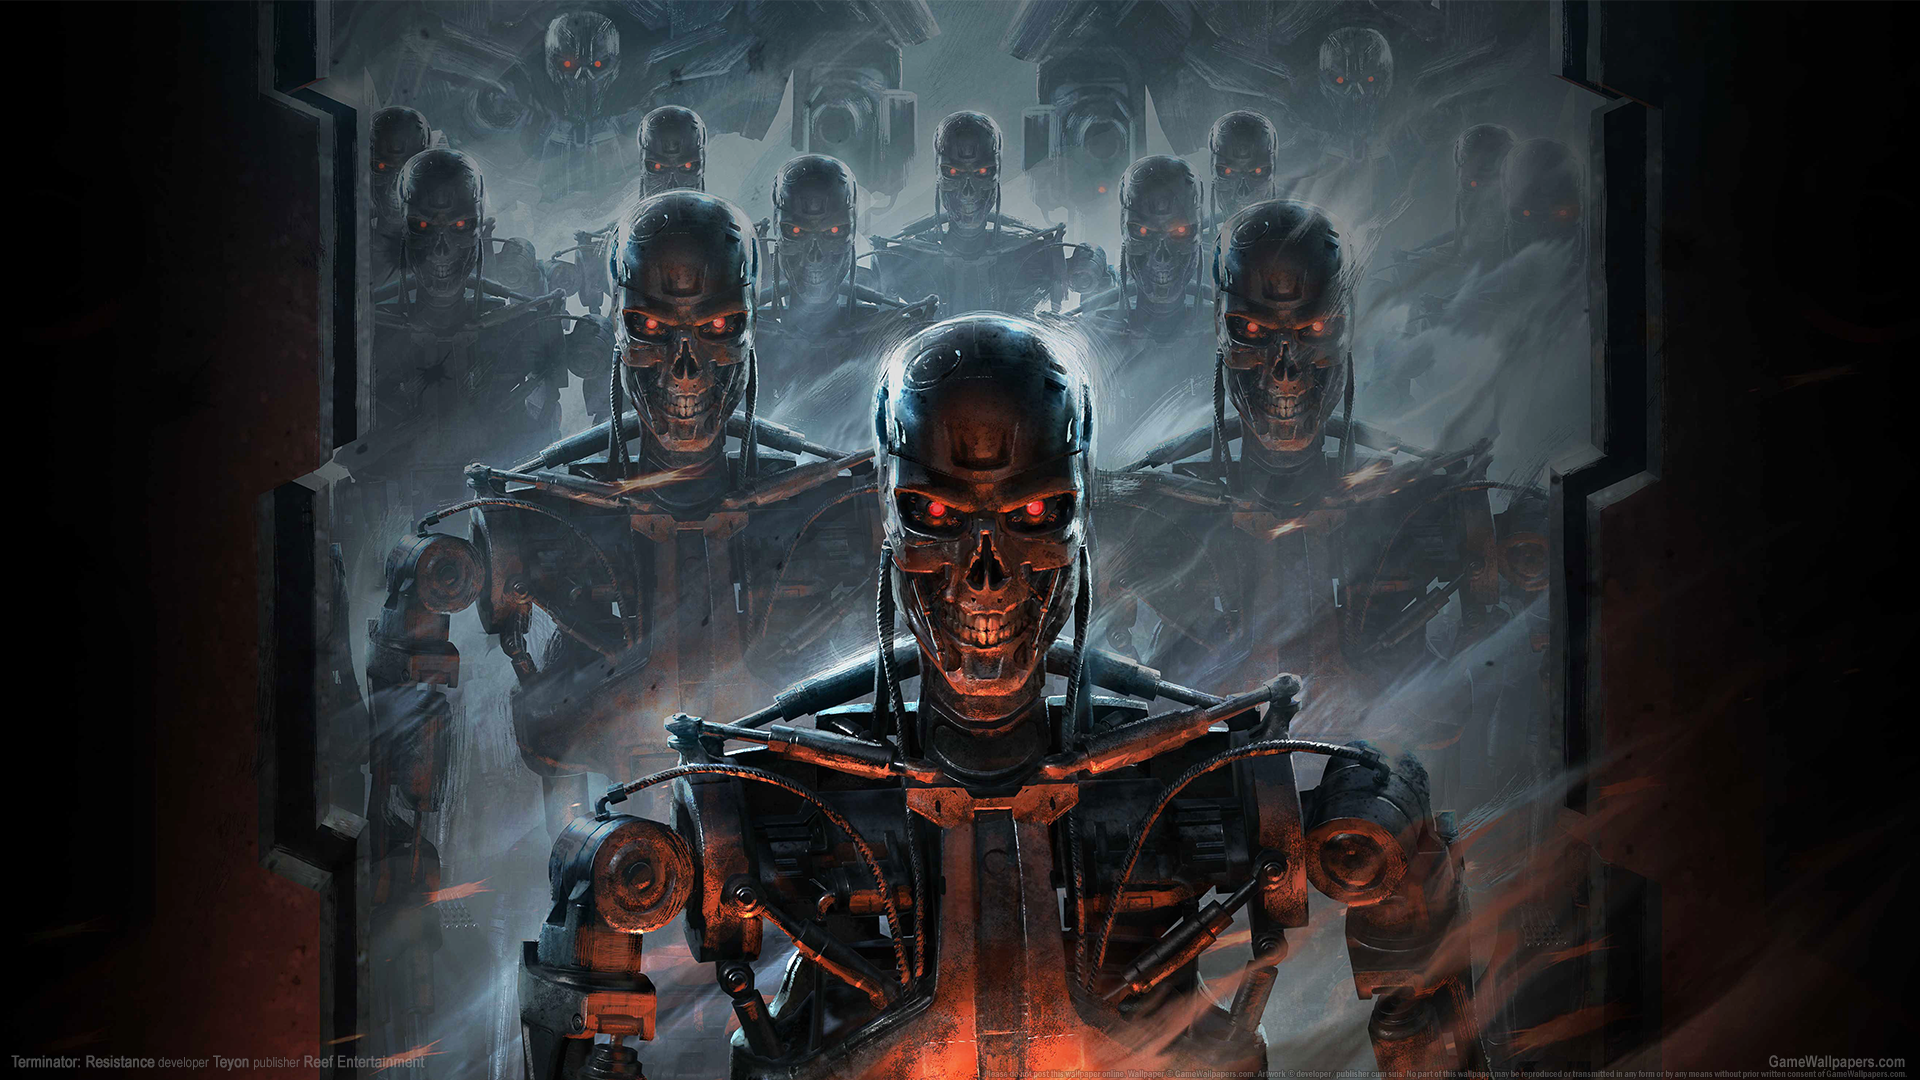 Terminator: Resistance 1920x1080 wallpaper or background 01